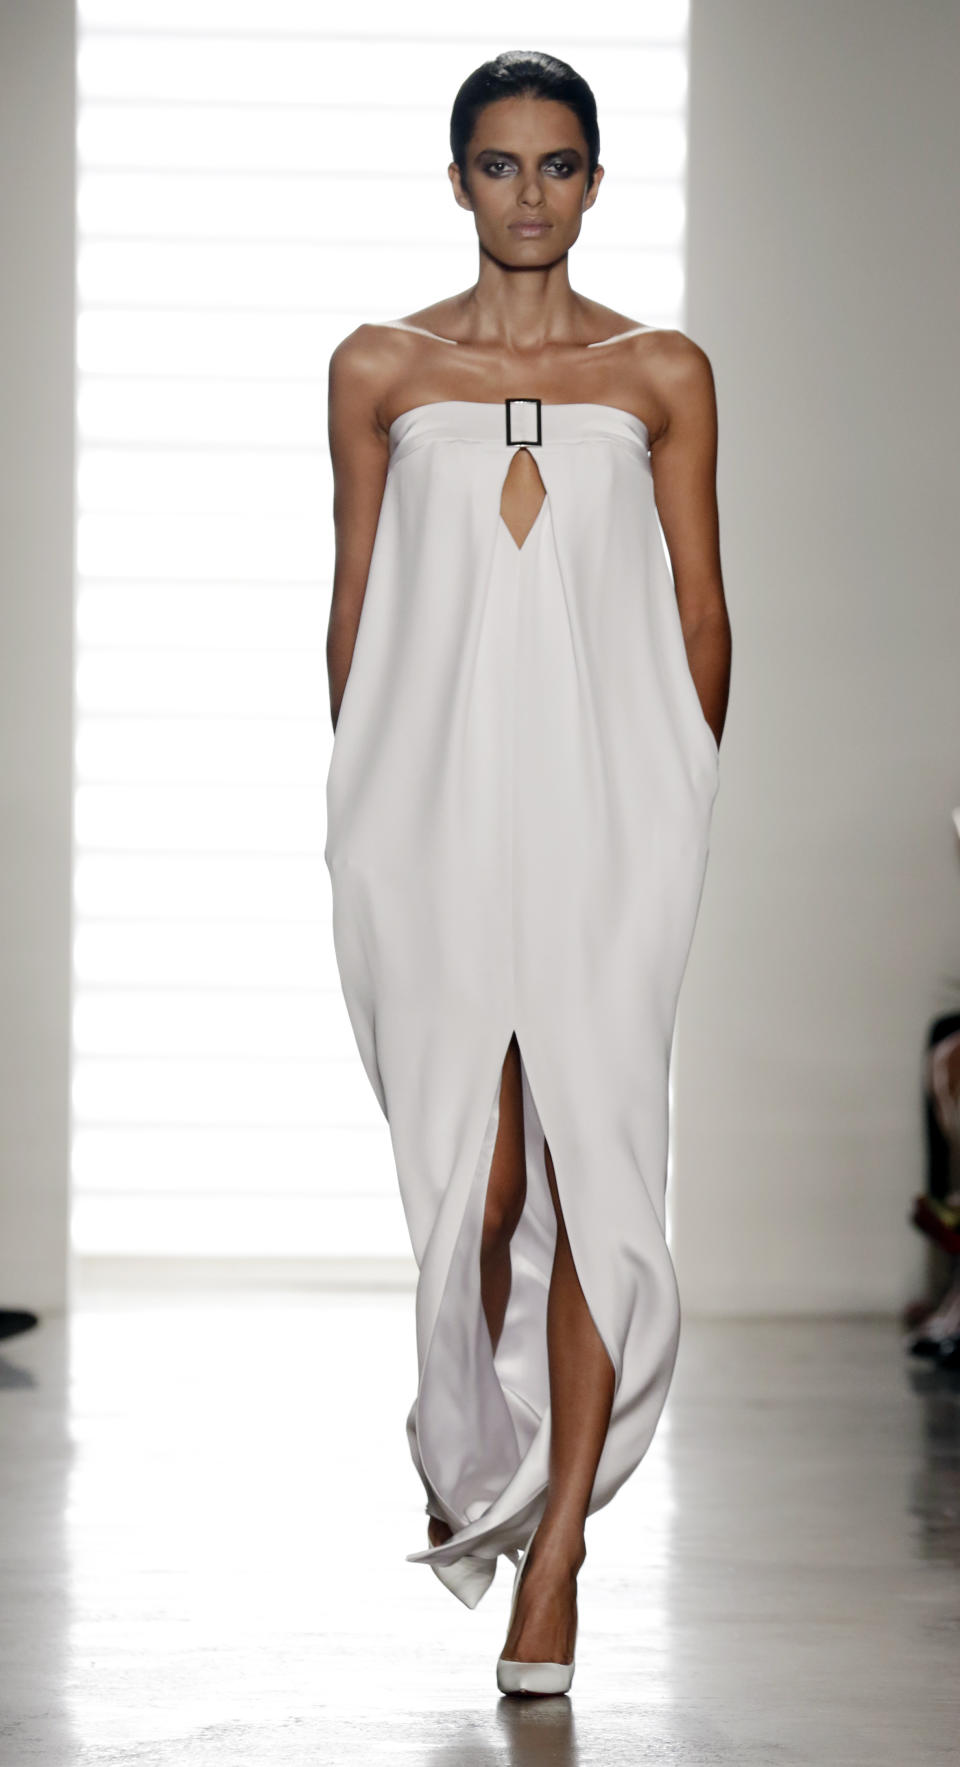 The Cushnie et Ochs Spring 2014 collection is modeled during Fashion Week in New York, Friday, Sept. 6, 2013. (AP Photo/Richard Drew)